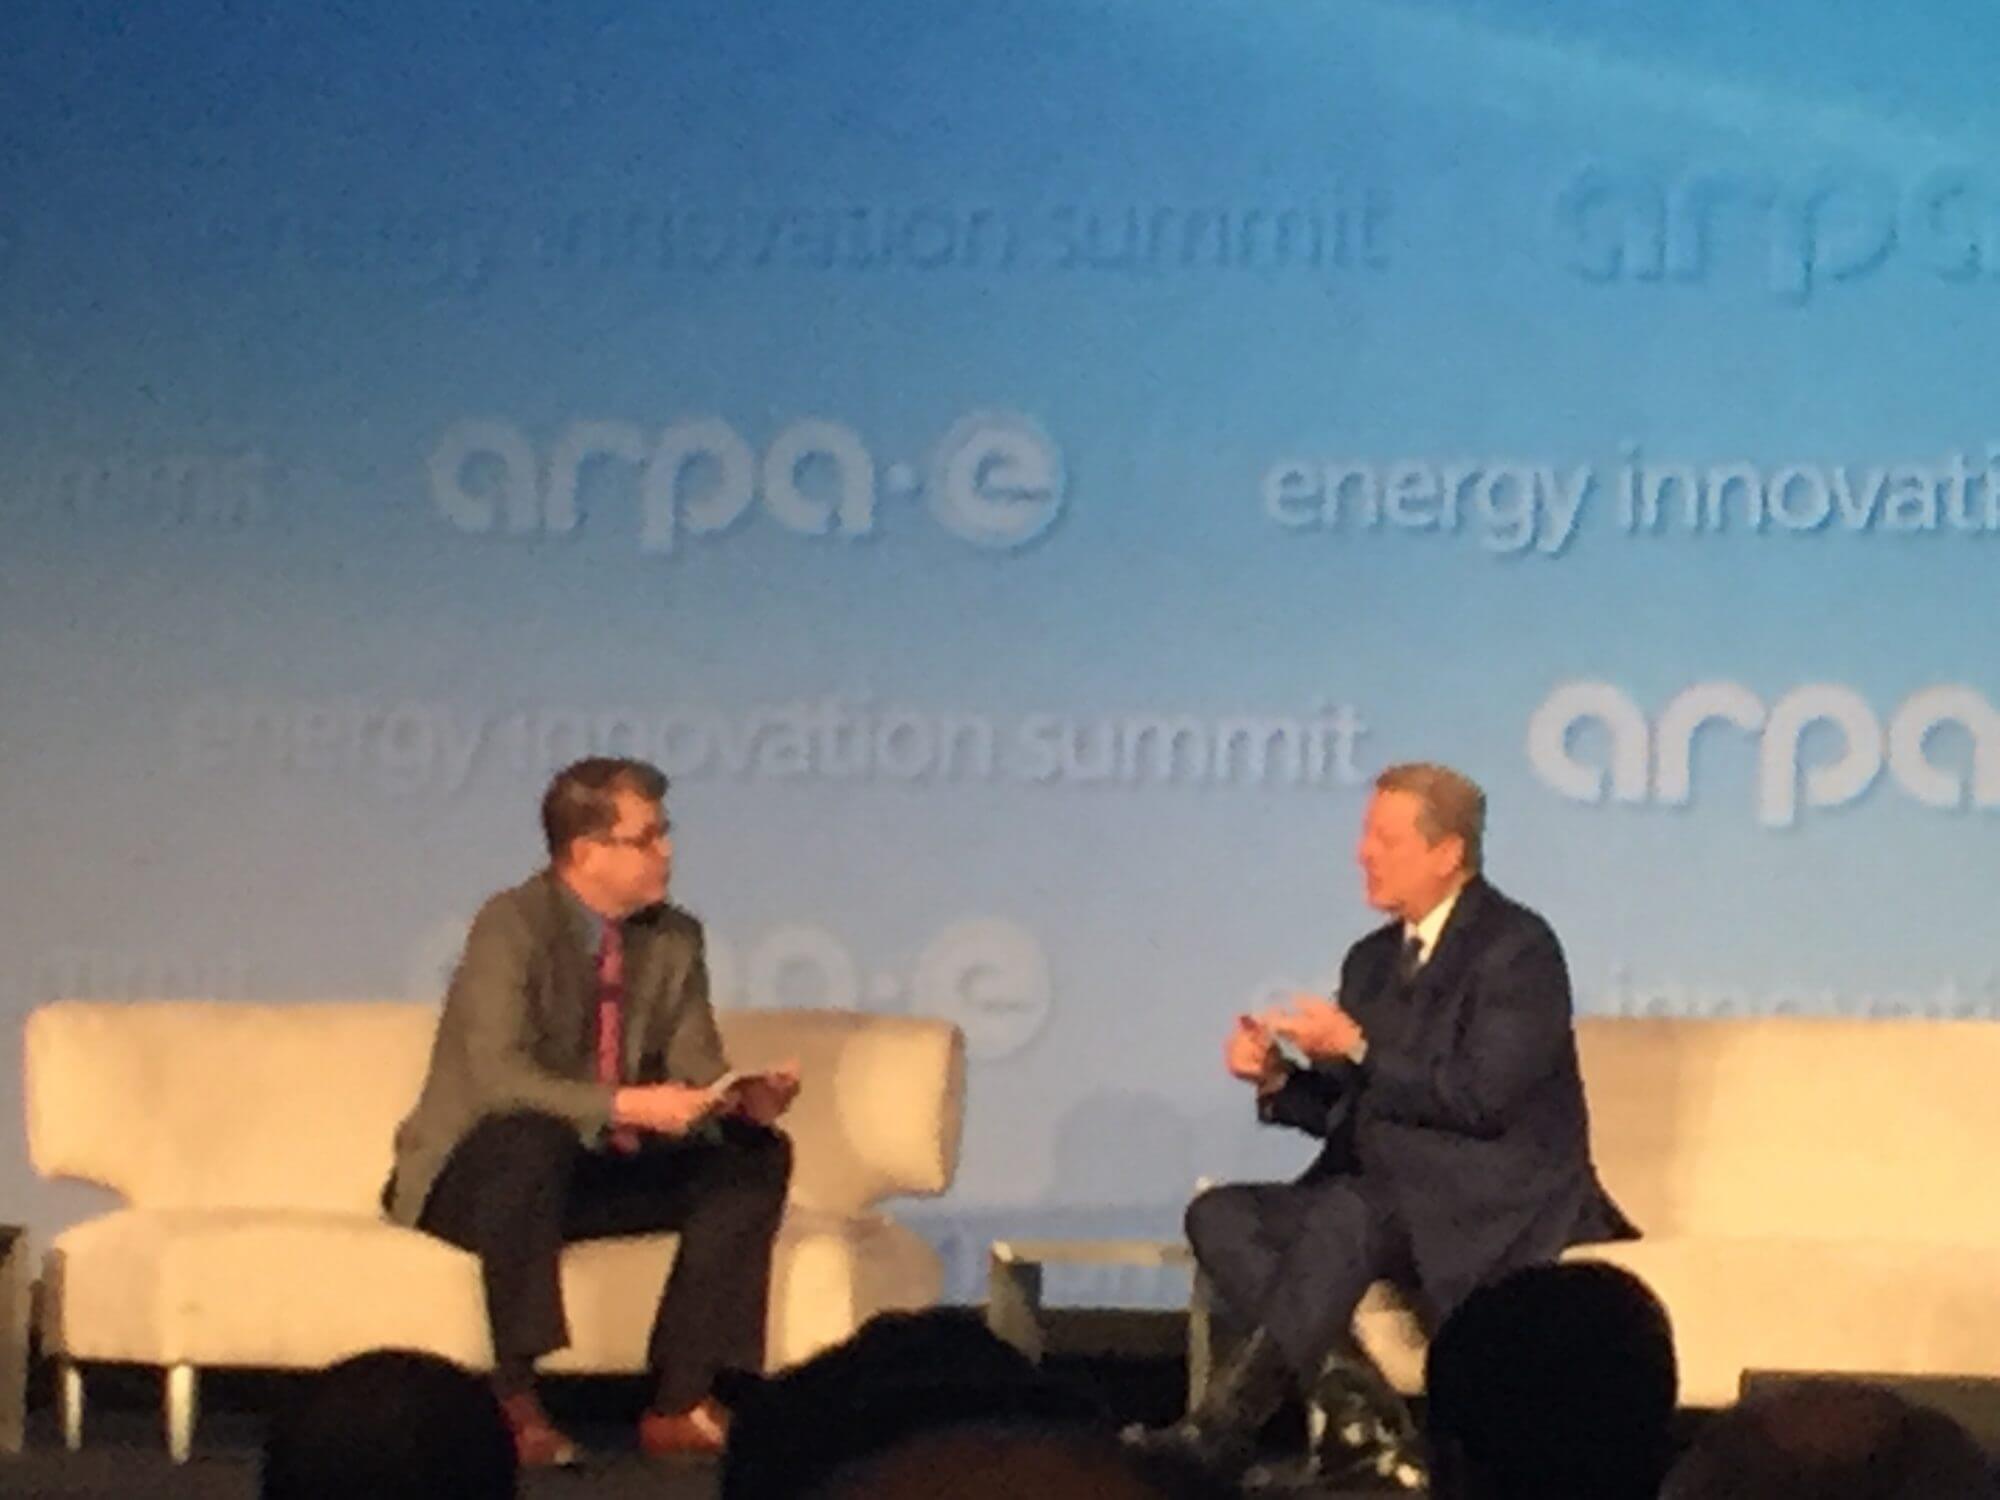 Former Vice President Al Gore says companies need to be greener